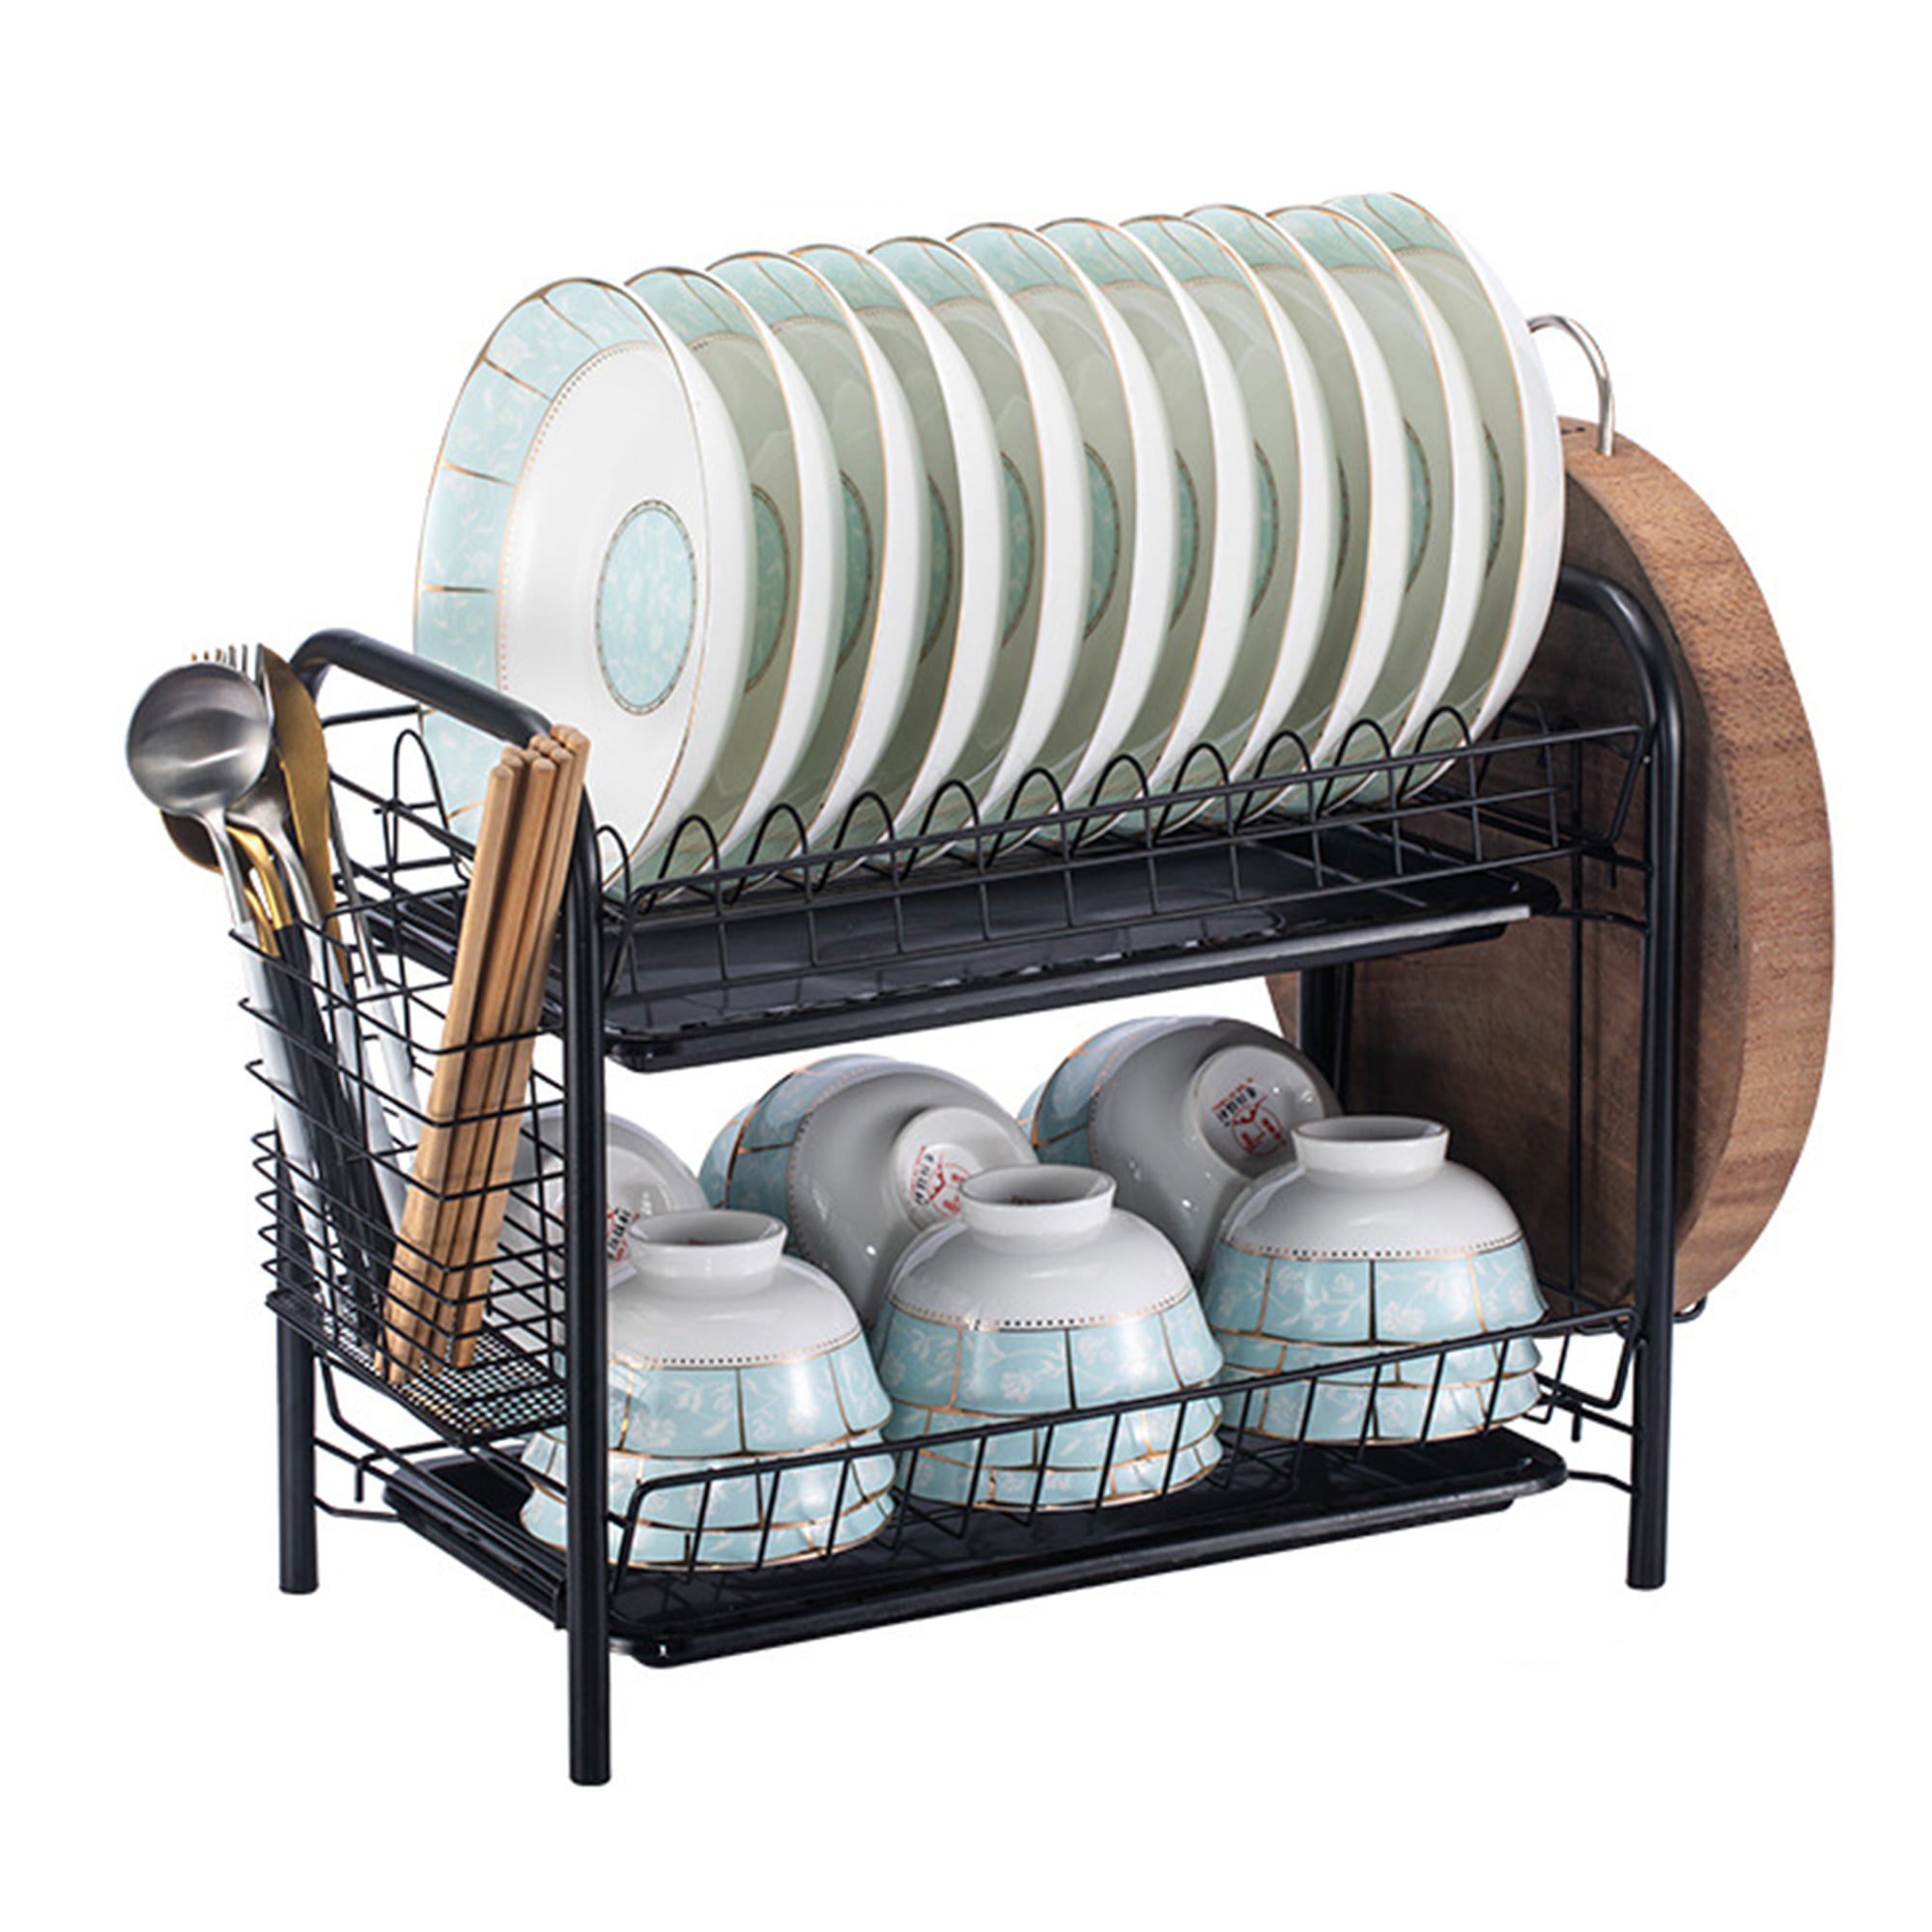 Details about   2/3 Tier Dish Plate Cup Drying Rack Organizer Drainer Storage Holder For Kitchen